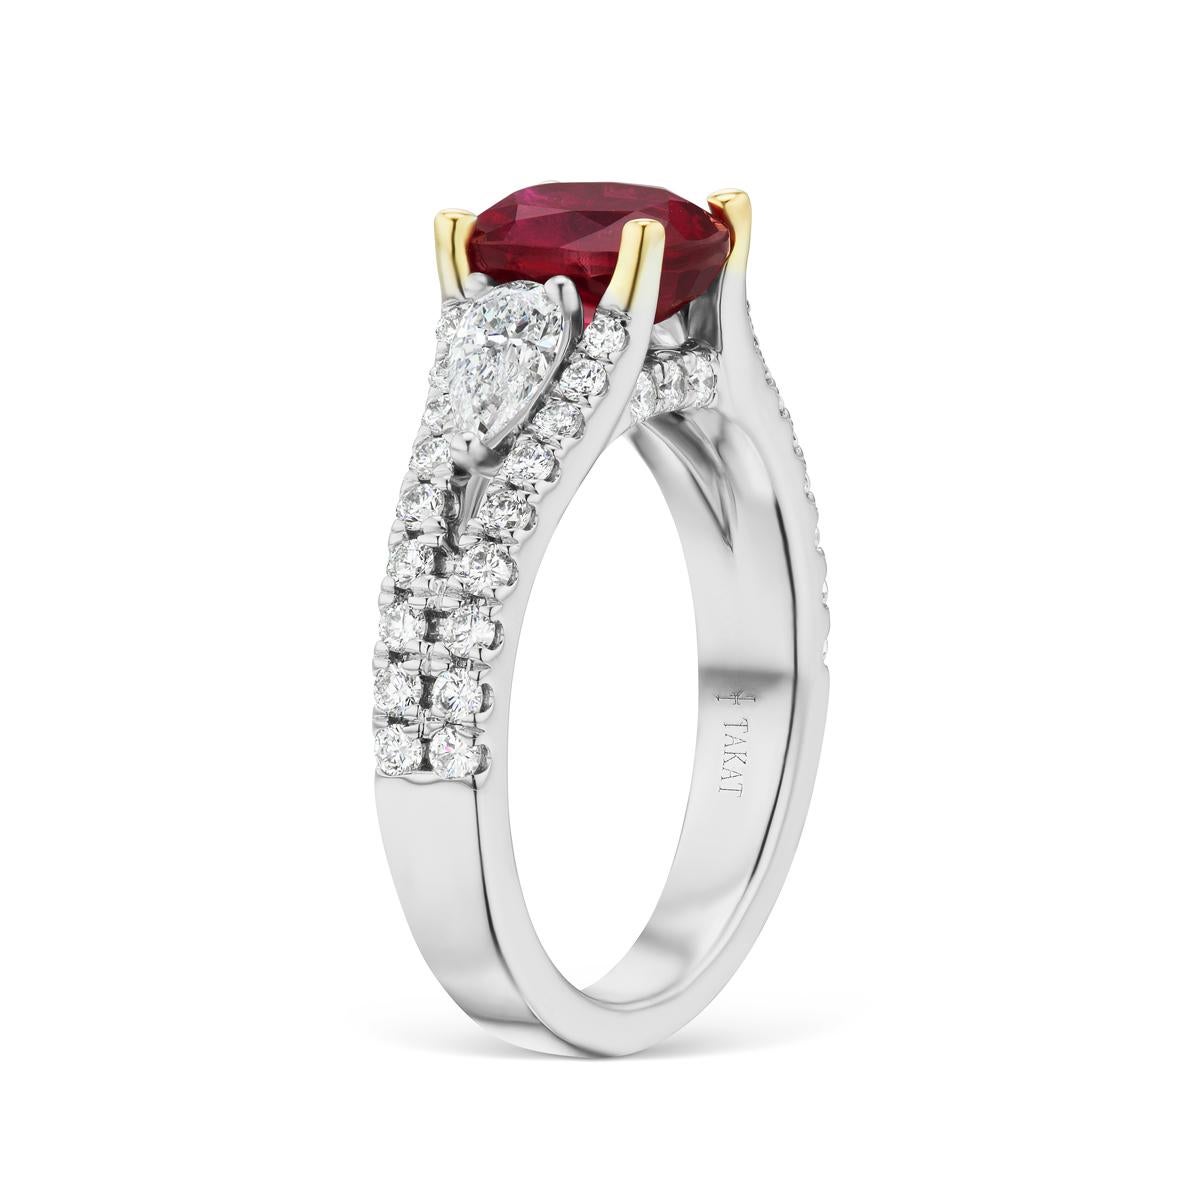 Modern Unheated Ruby And Diamond Ring In 18K Gold By RayazTakat